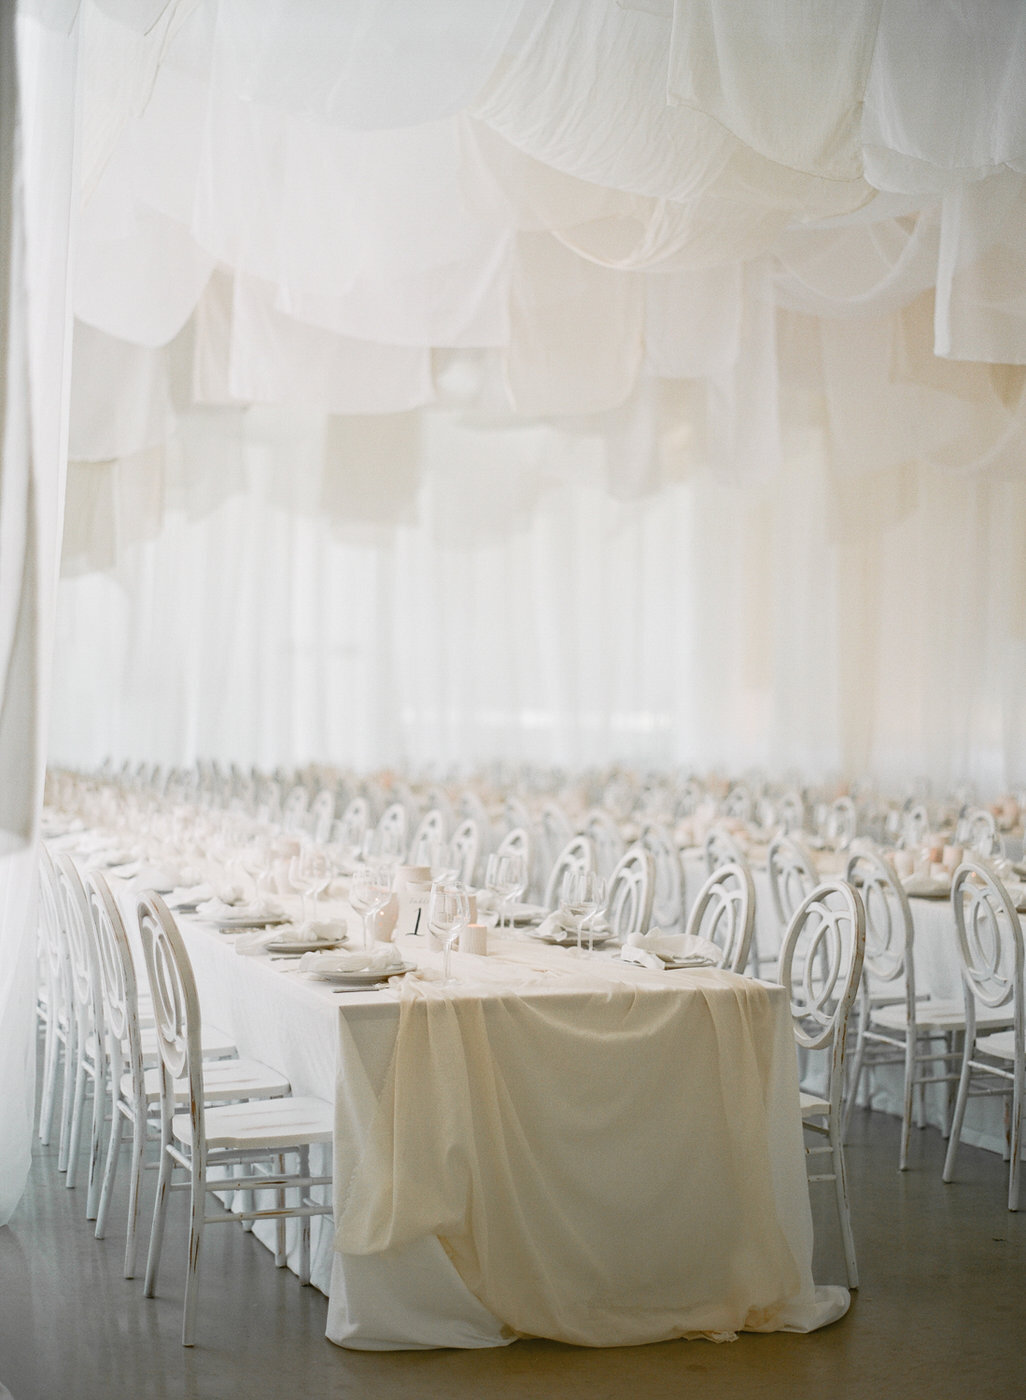 Wedding styling tip: draw the attention upward with drapery